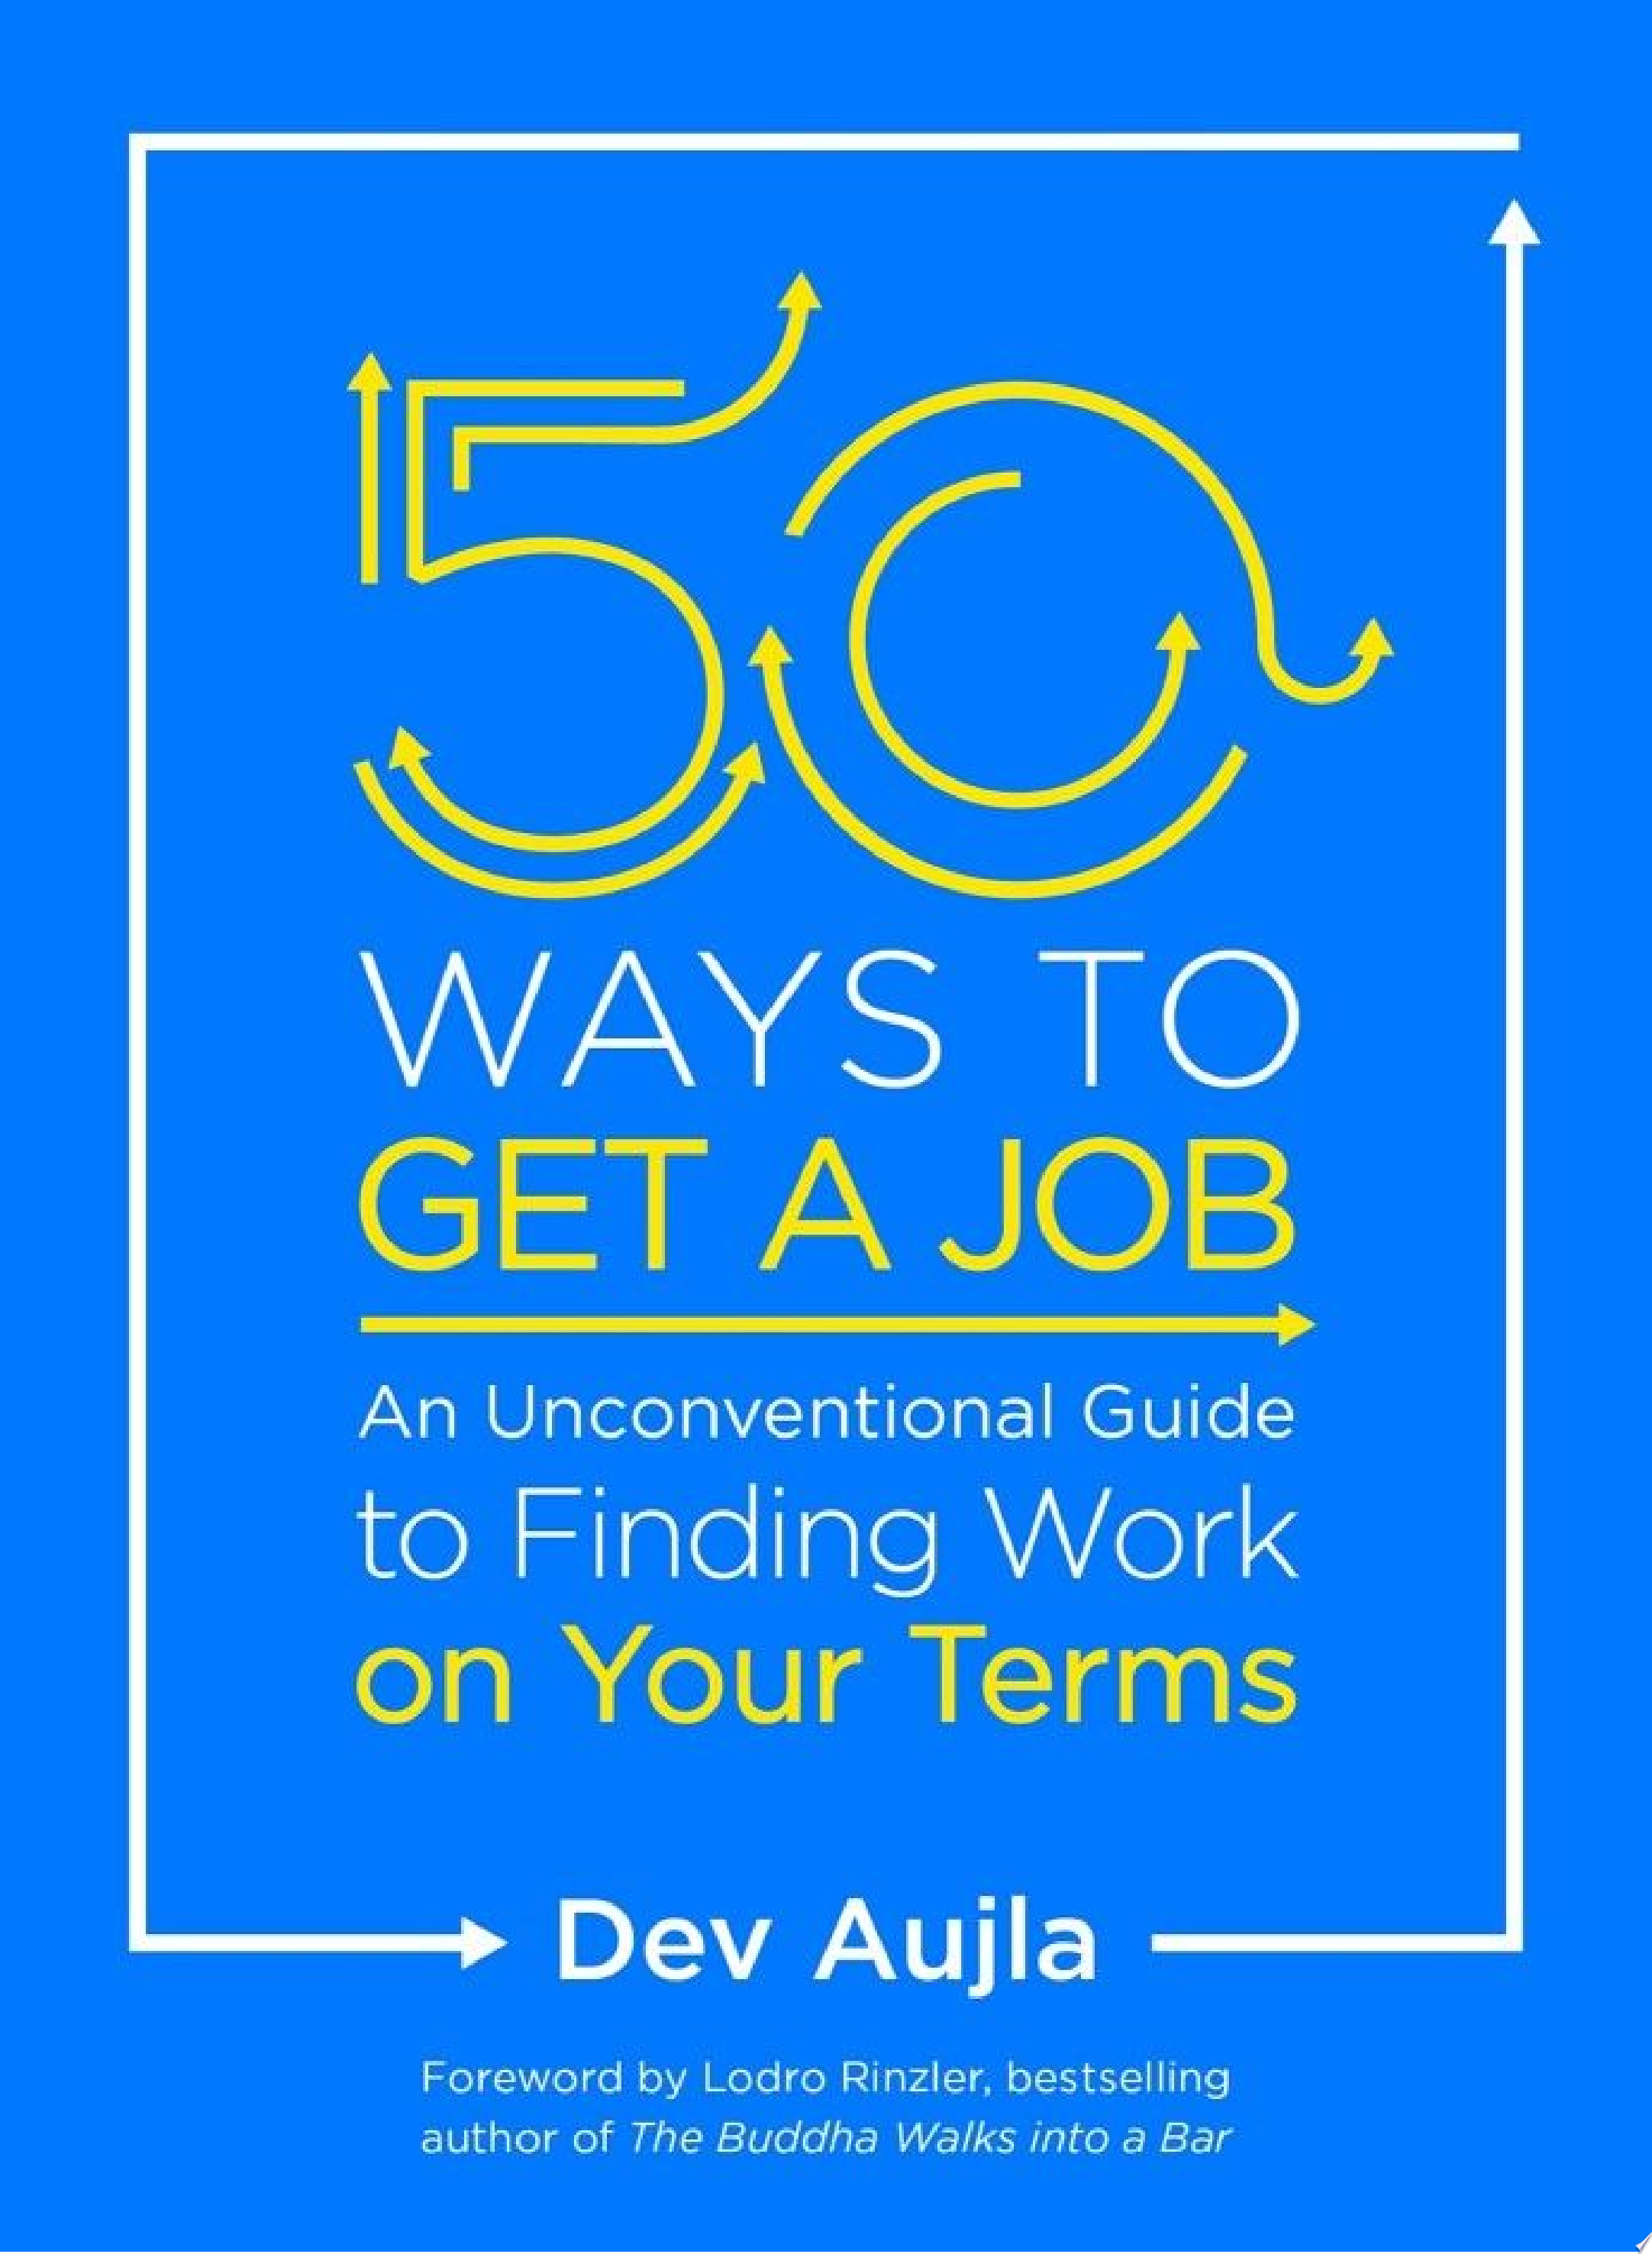 Image for "50 Ways to Get a Job"